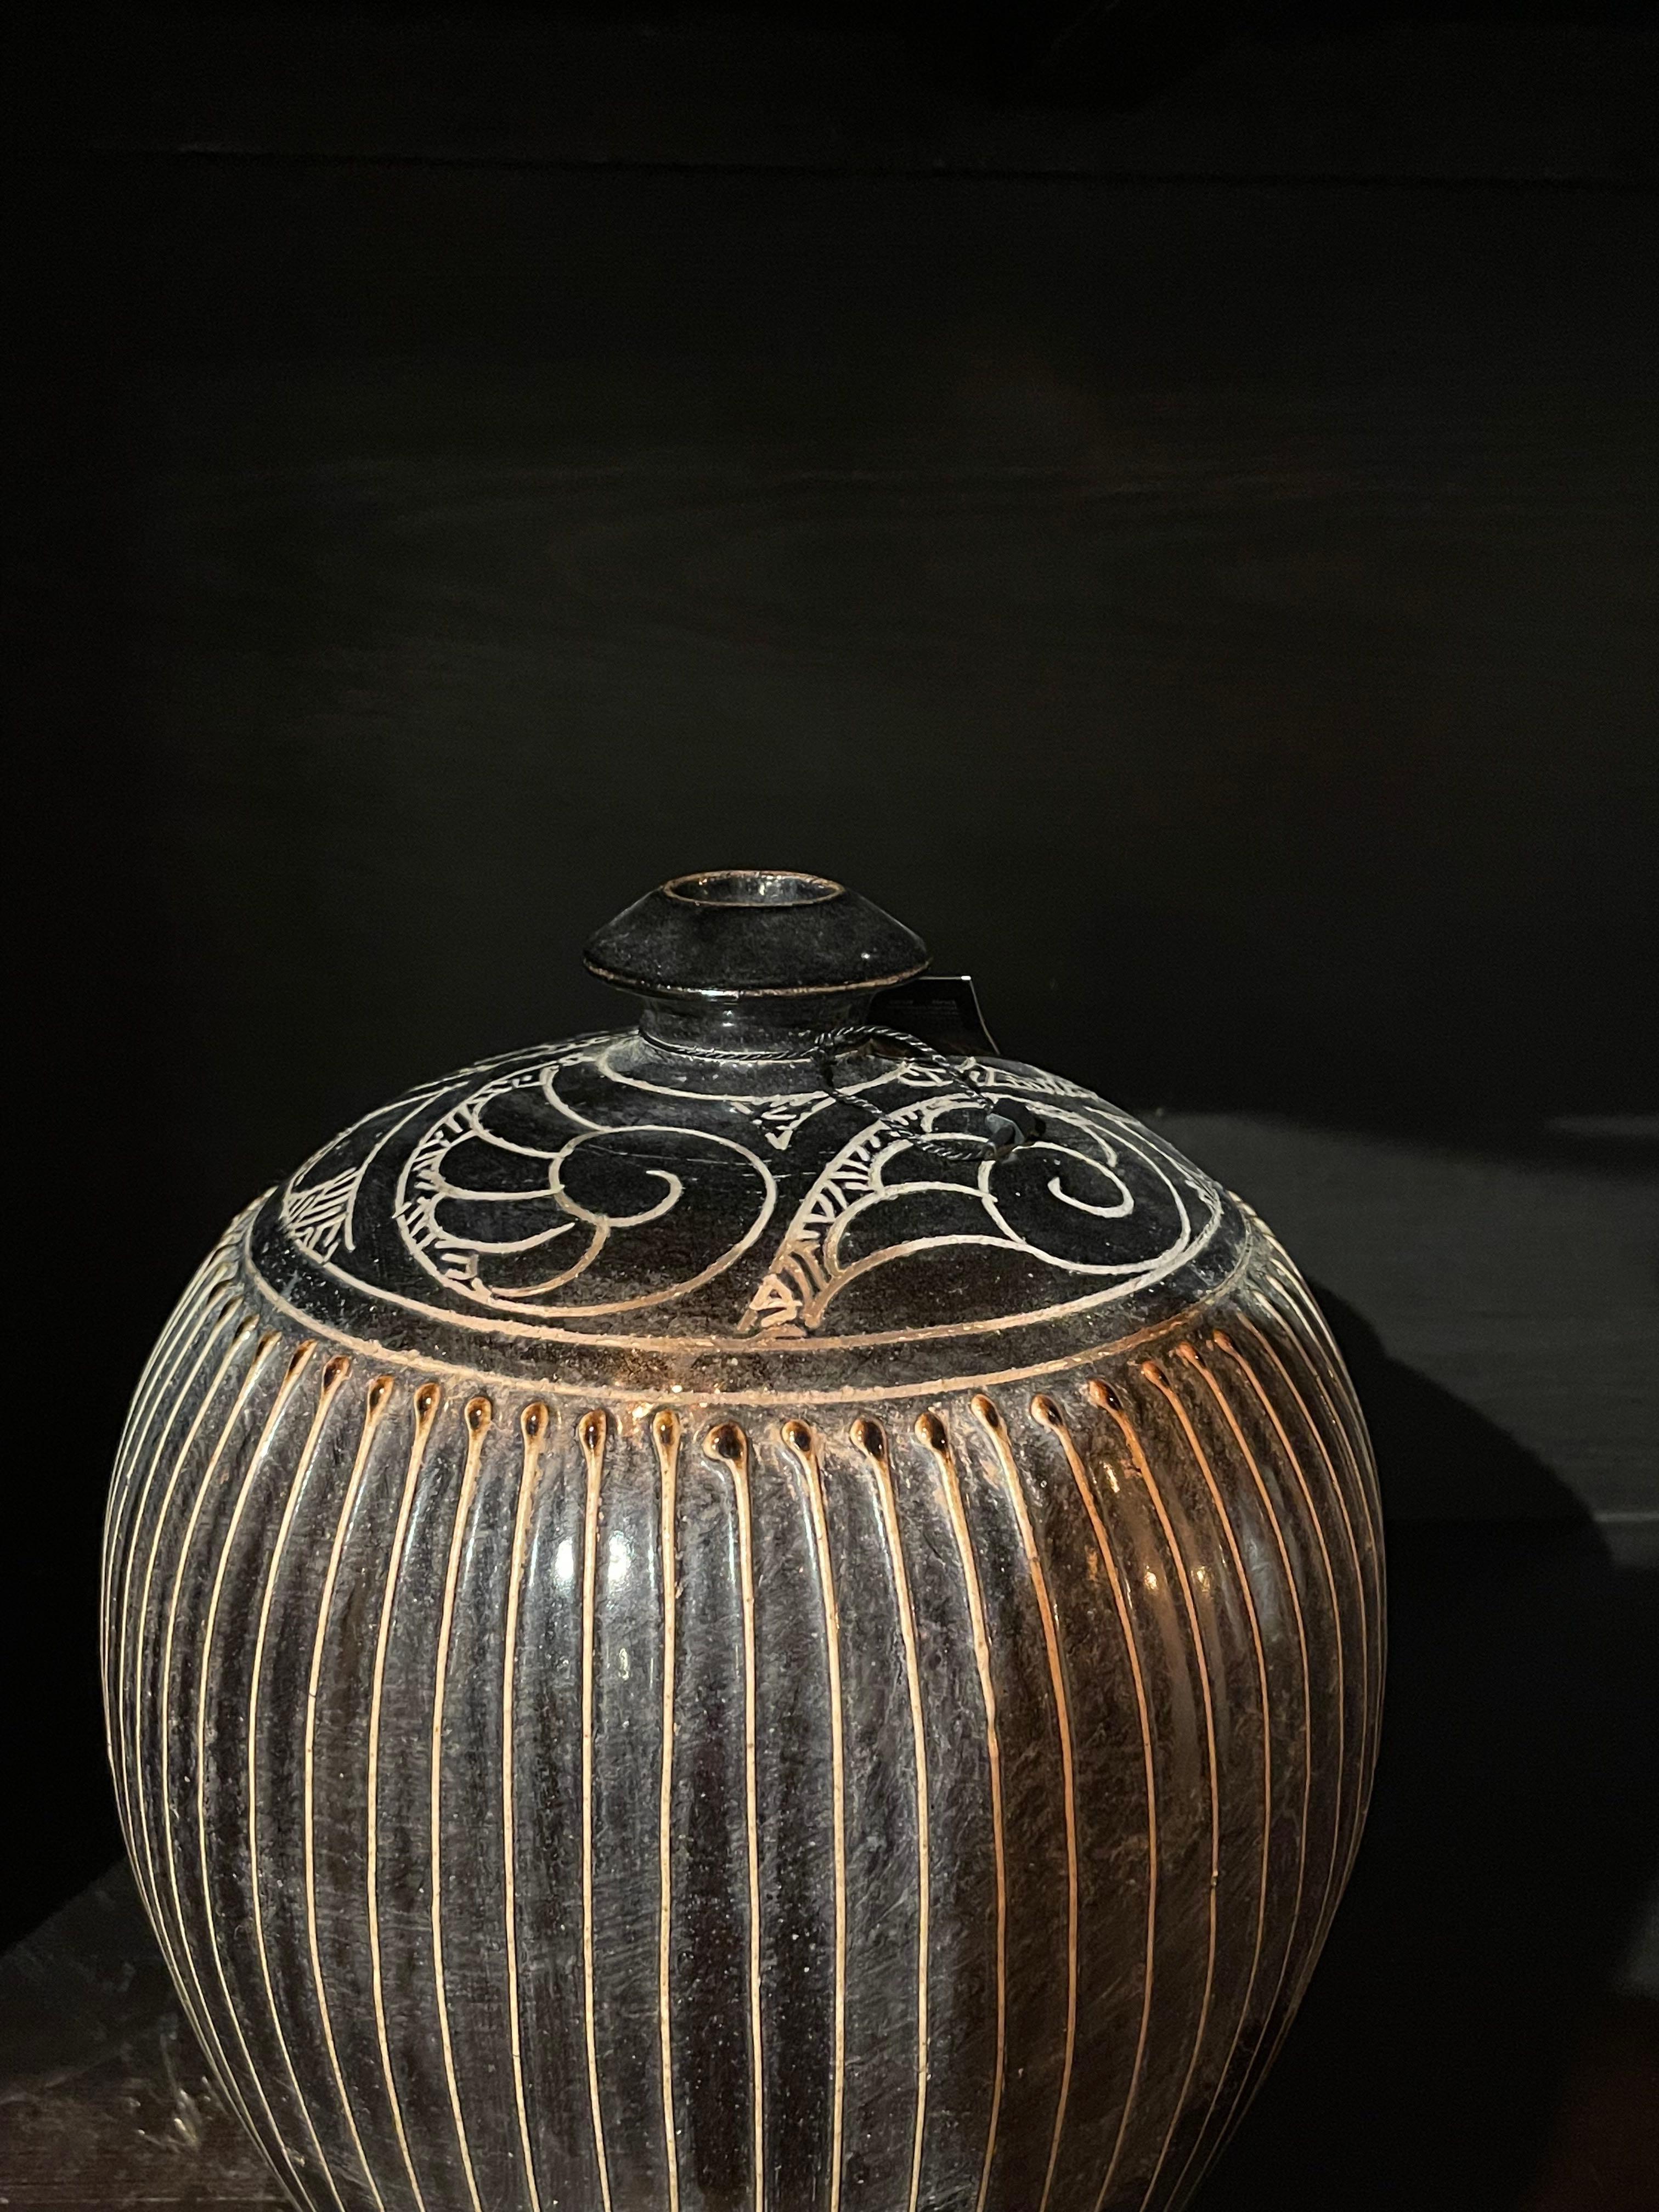 Contemporary Chinese black and gold stripe vase with 
decorative design on top of rounded shaped vase.
